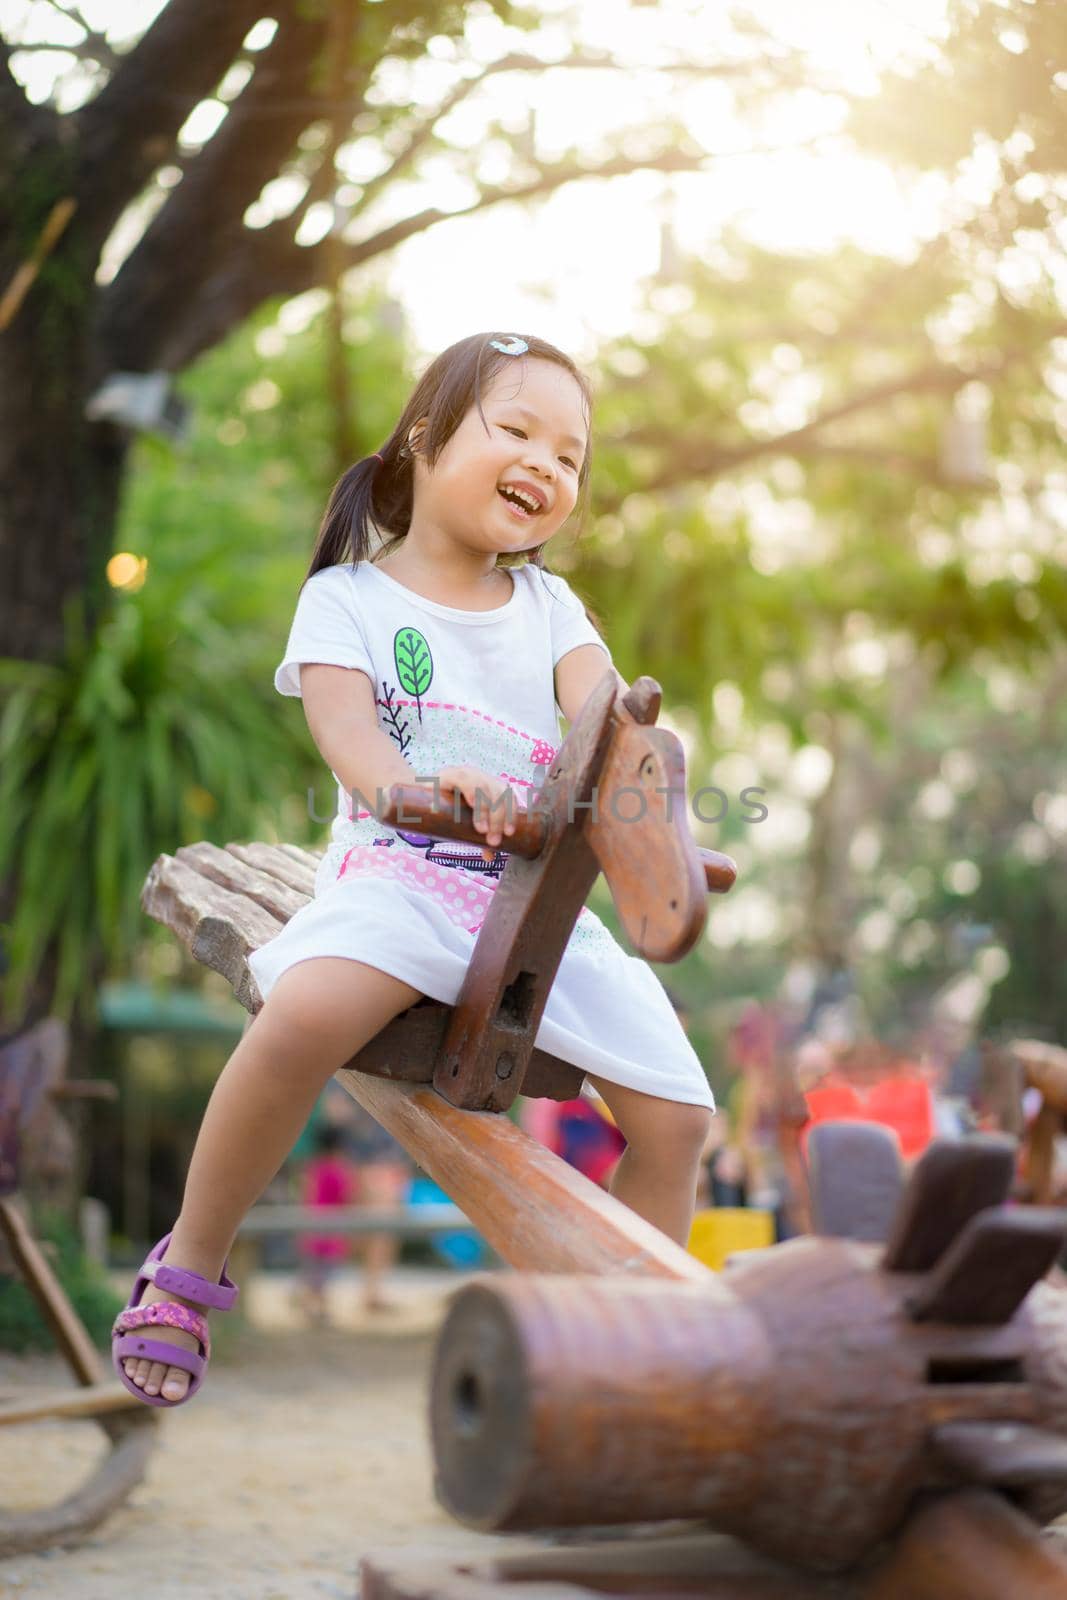 Asian little girl having fun on seesaw at playground